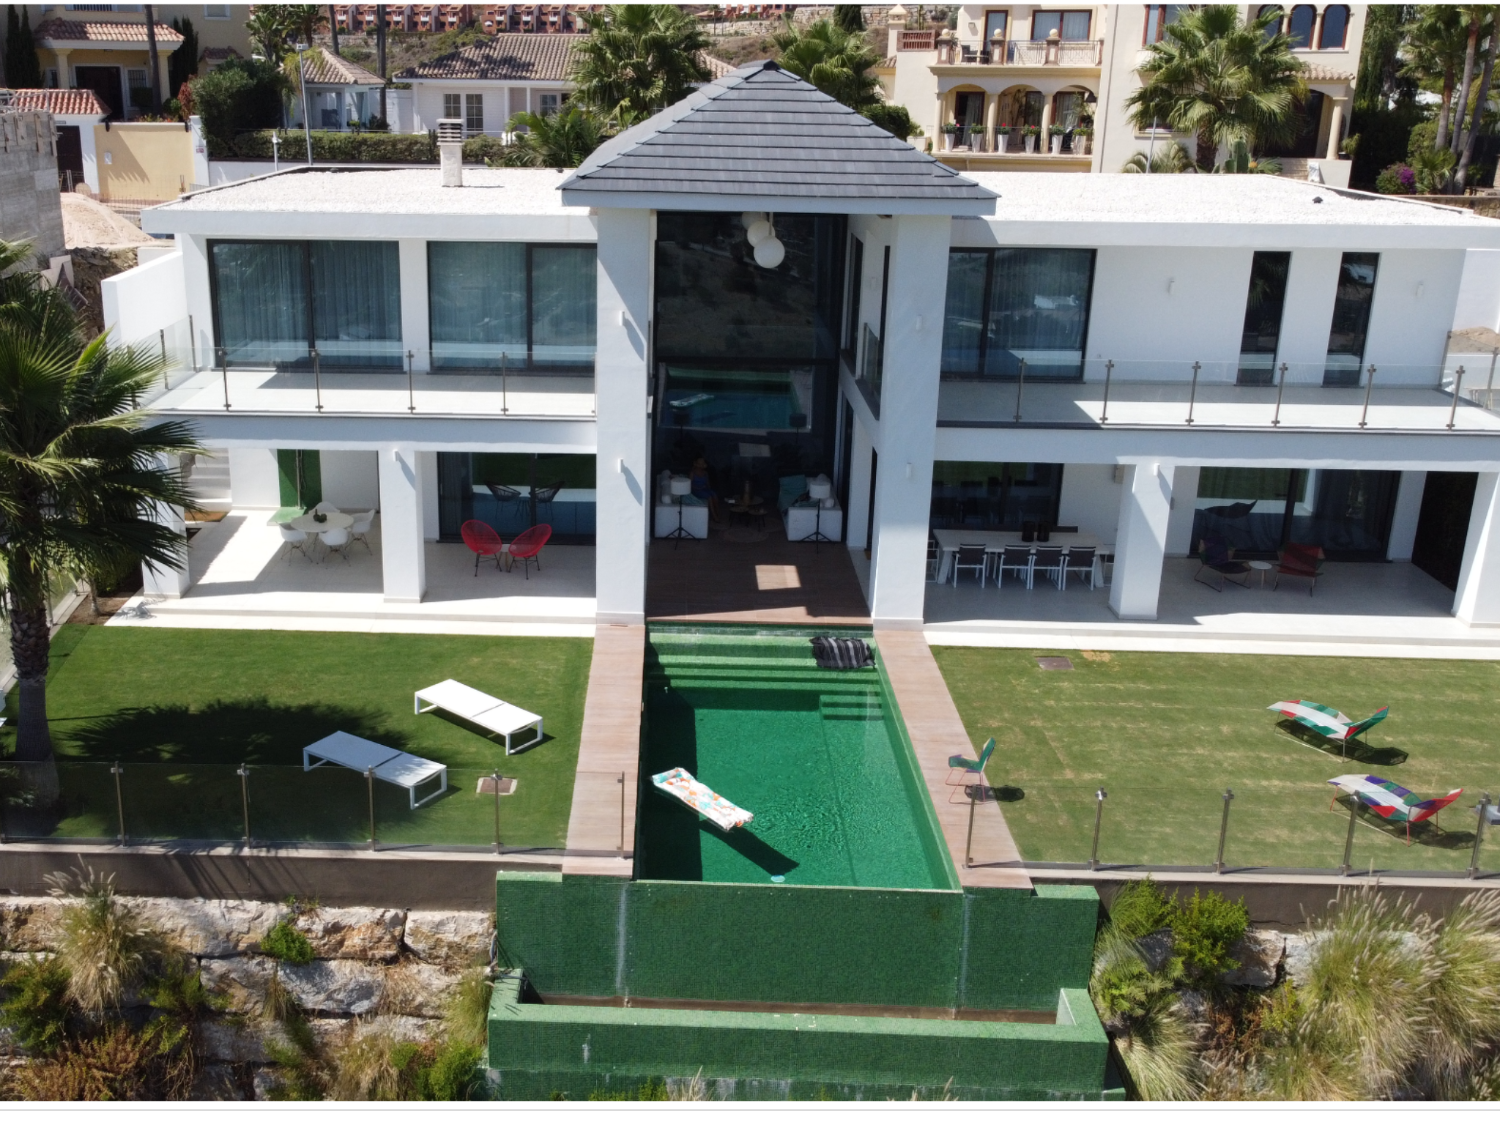 SOLD! SPECTACULAR DESIGN VILLA SITUATED IN URB. NEW WATCHTOWER, LA ALQUERÍA